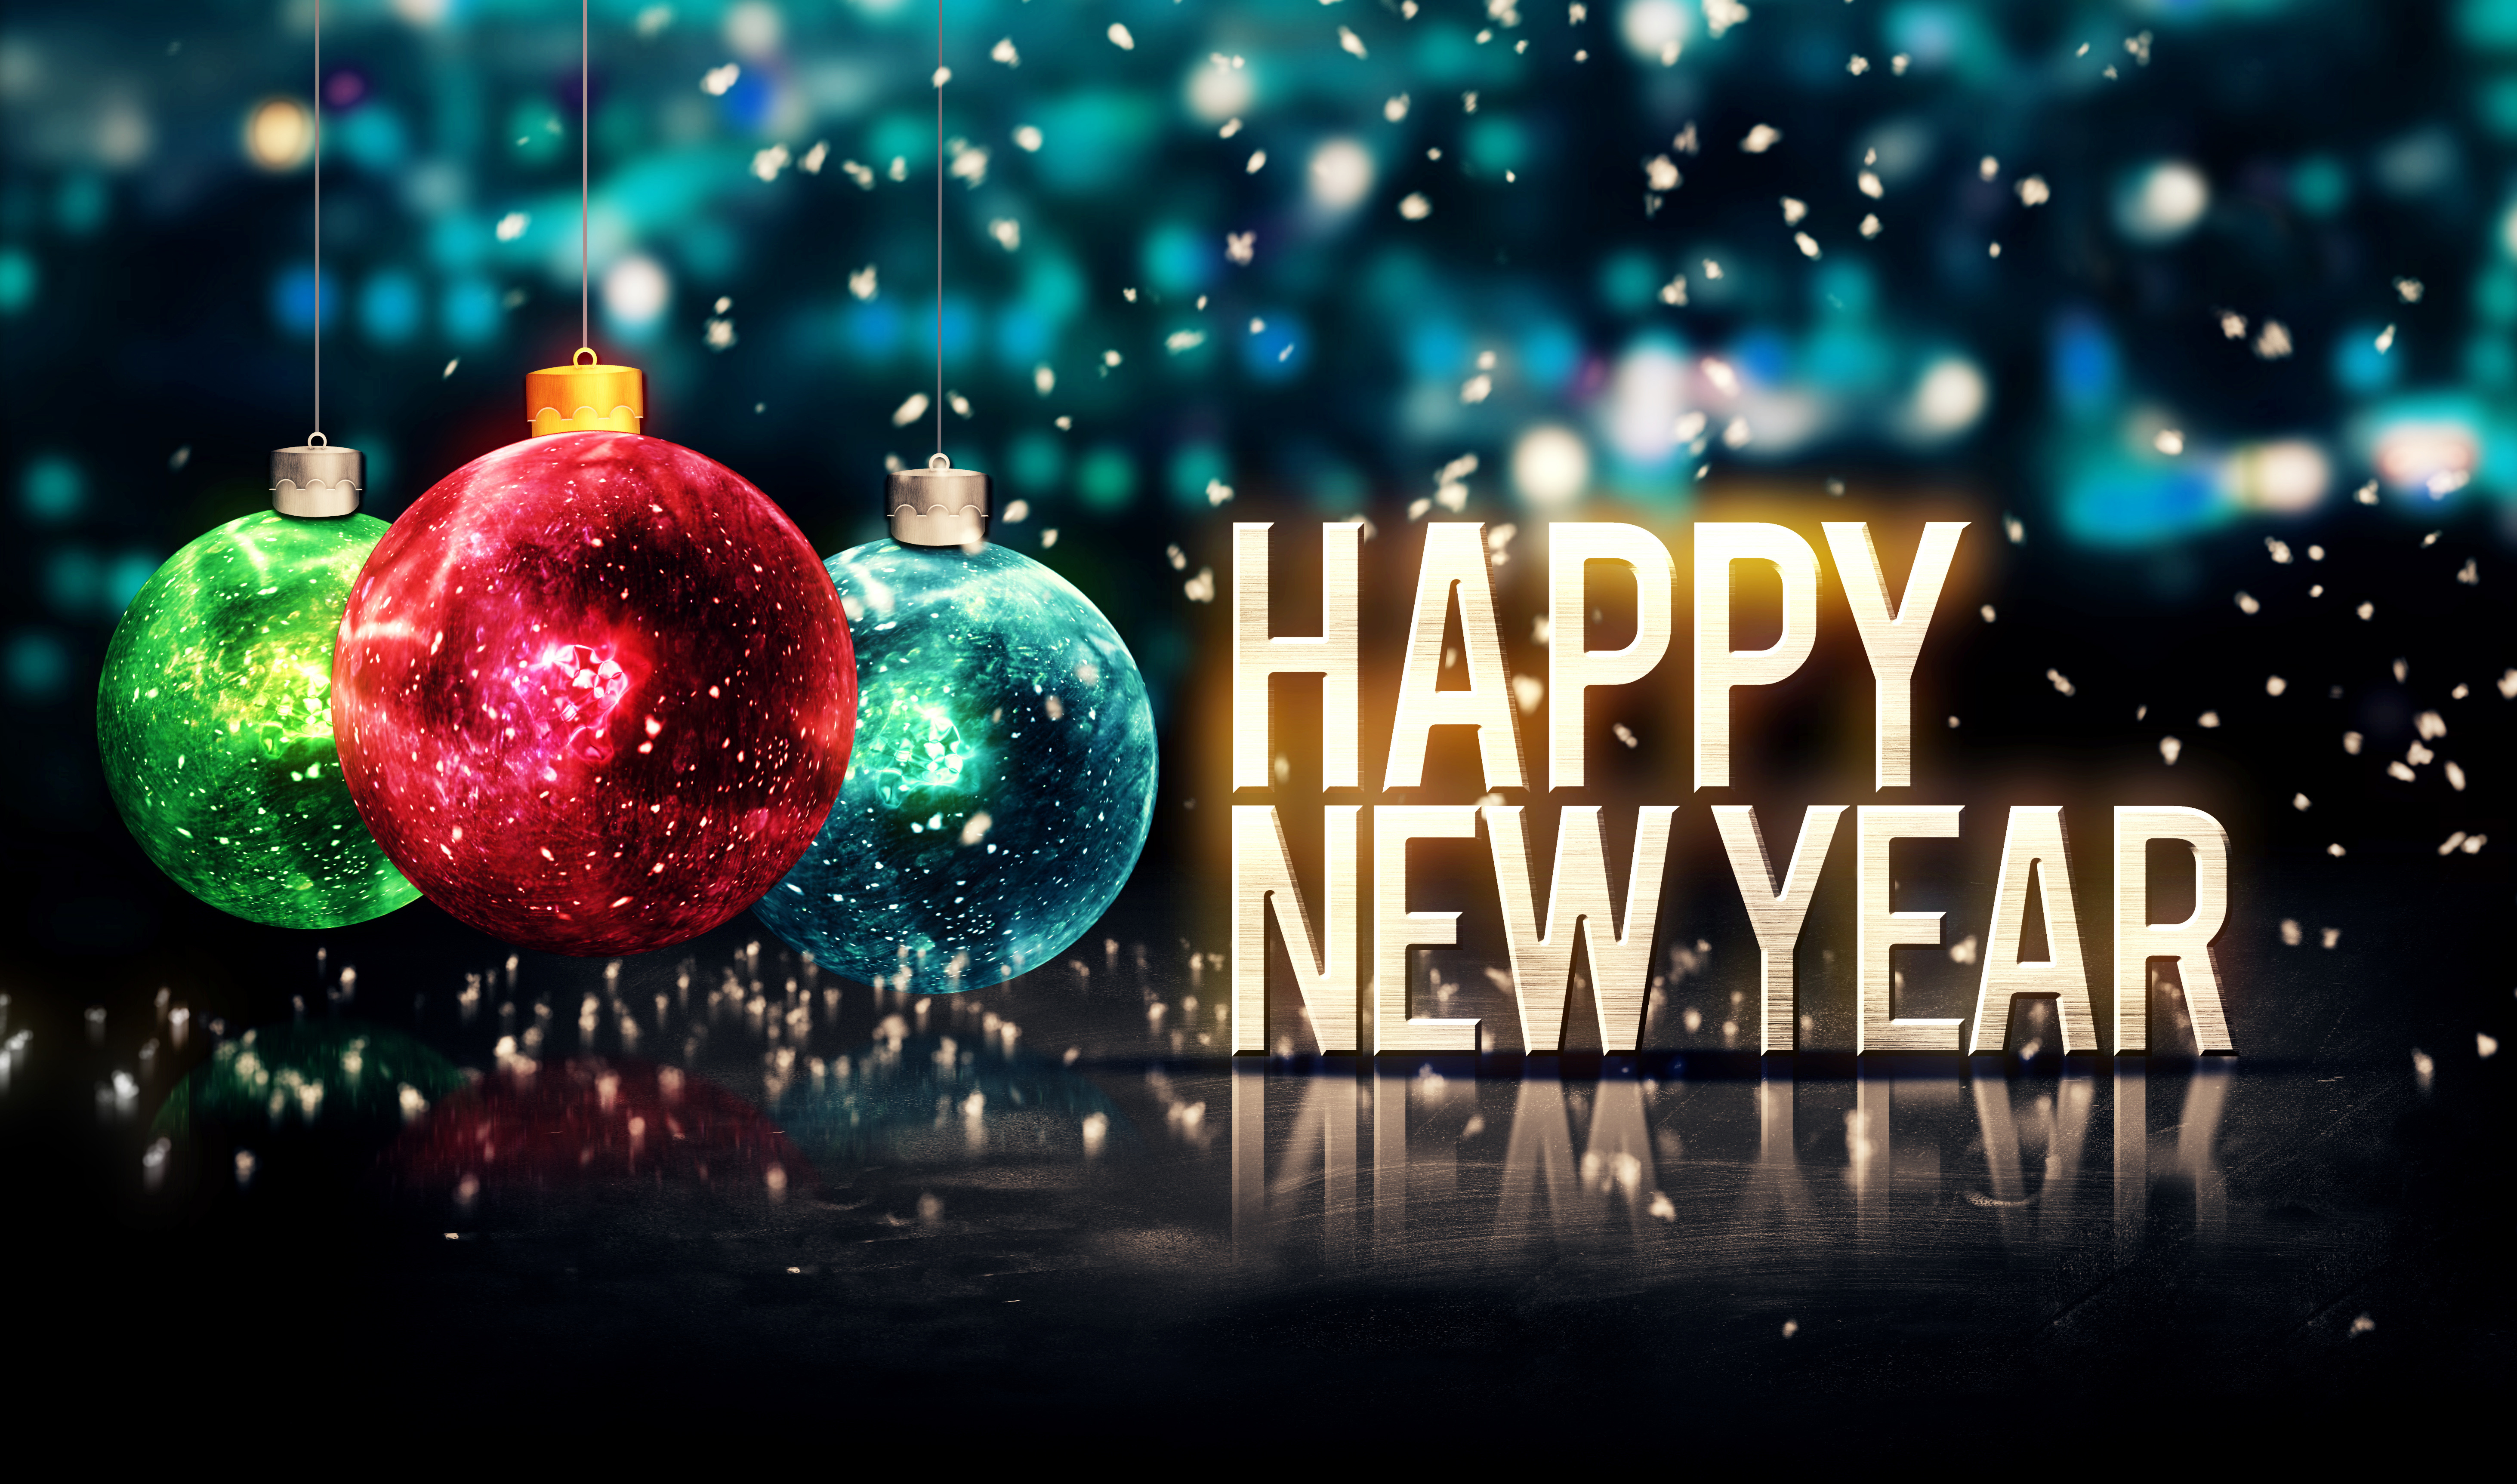 Happy New Year Wallpapers HD download 5850x3450